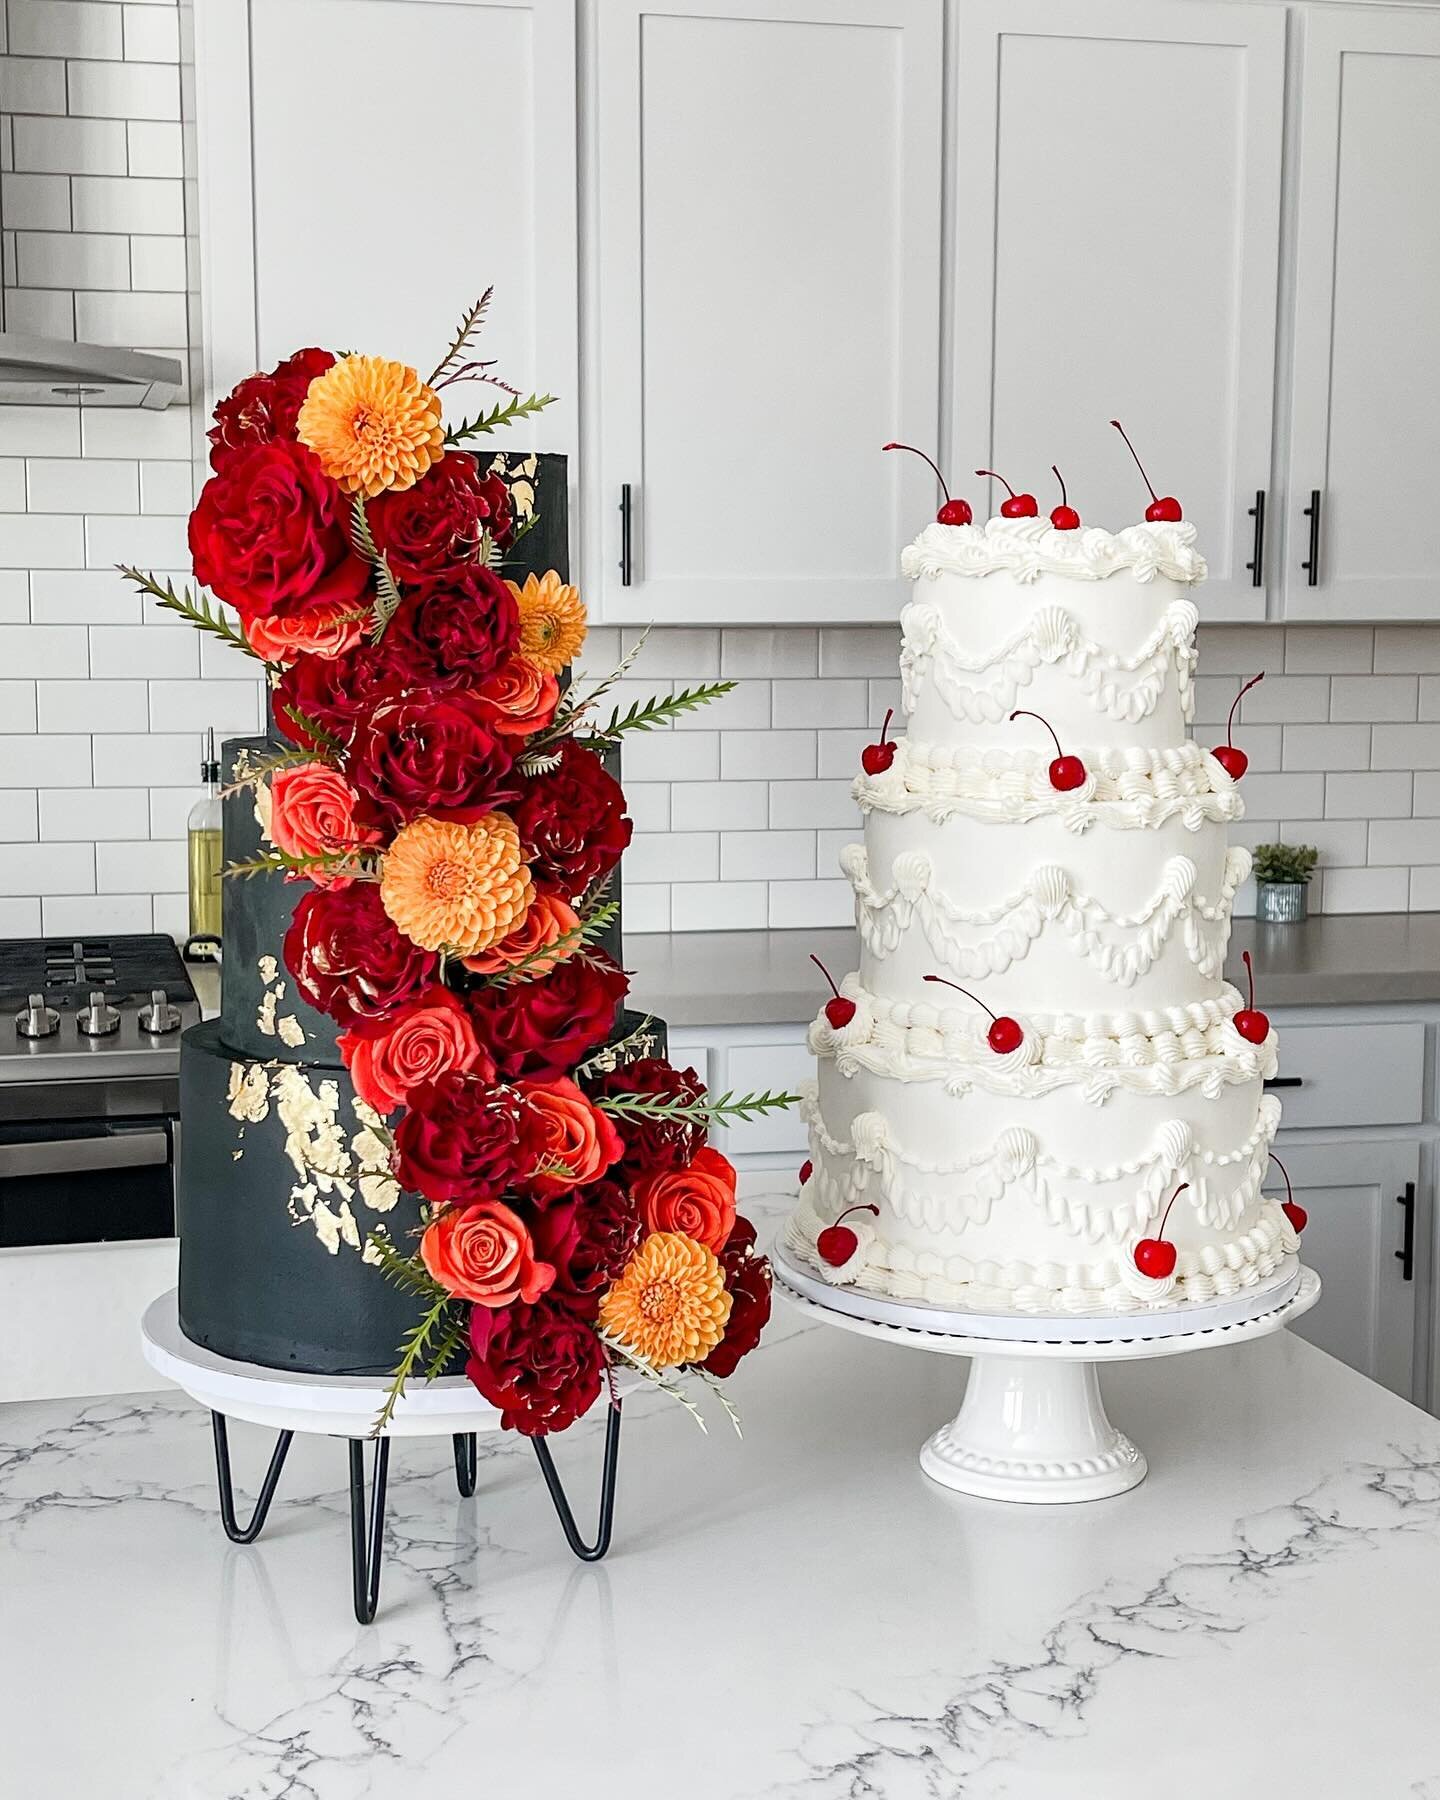 complete opposites but so equally loved.. 🖤🤍

both two tier 6&rdquo;, 8&rdquo; &amp; 10&rdquo; cakes! Adorned with fresh floral, @barnabas_gold gold leaf, piping, cherries &amp; extra love ✨

#weddingcake #weddingdesserts #baker #sacramentowedding 